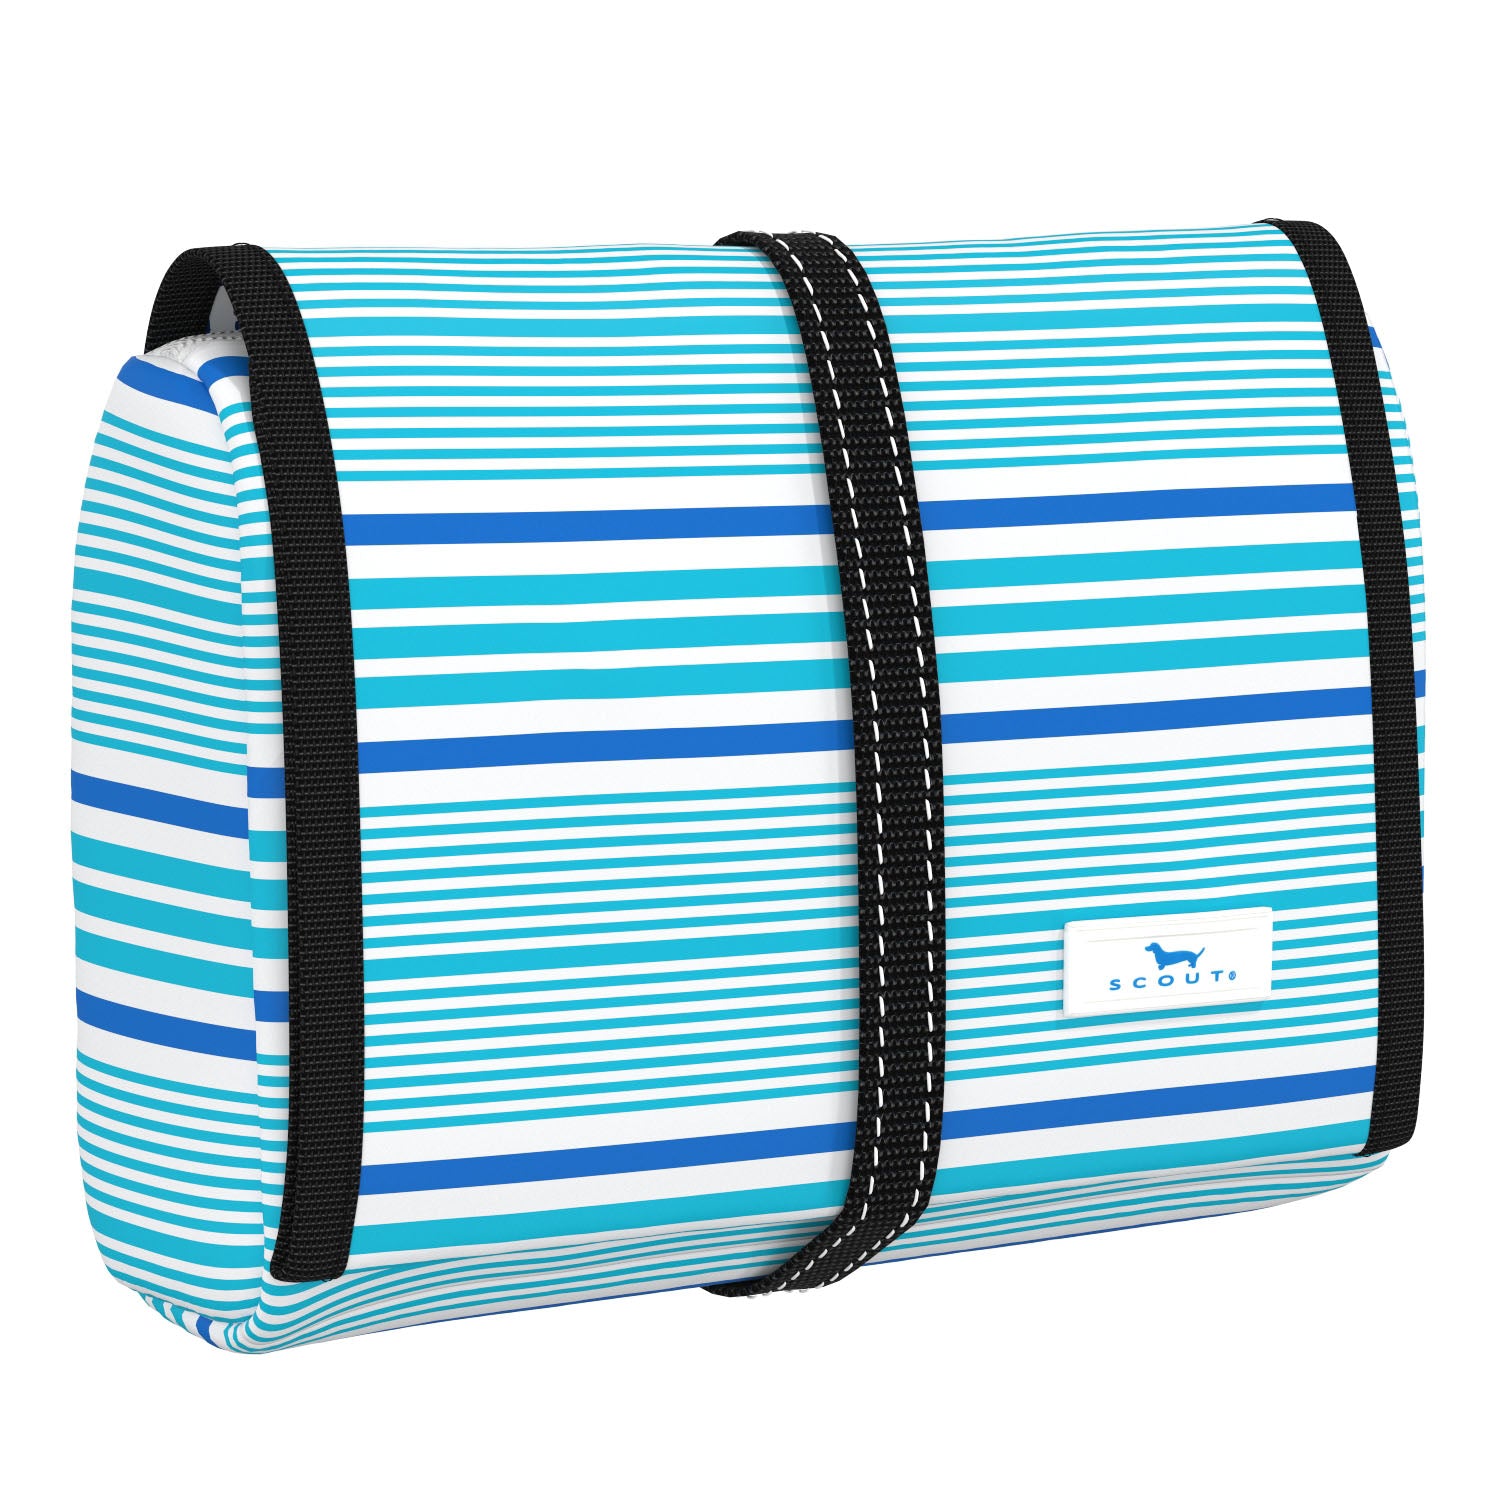 Scout Beauty Burrito Toiletry Bag Travel Accessories in Seas the Day at Wrapsody